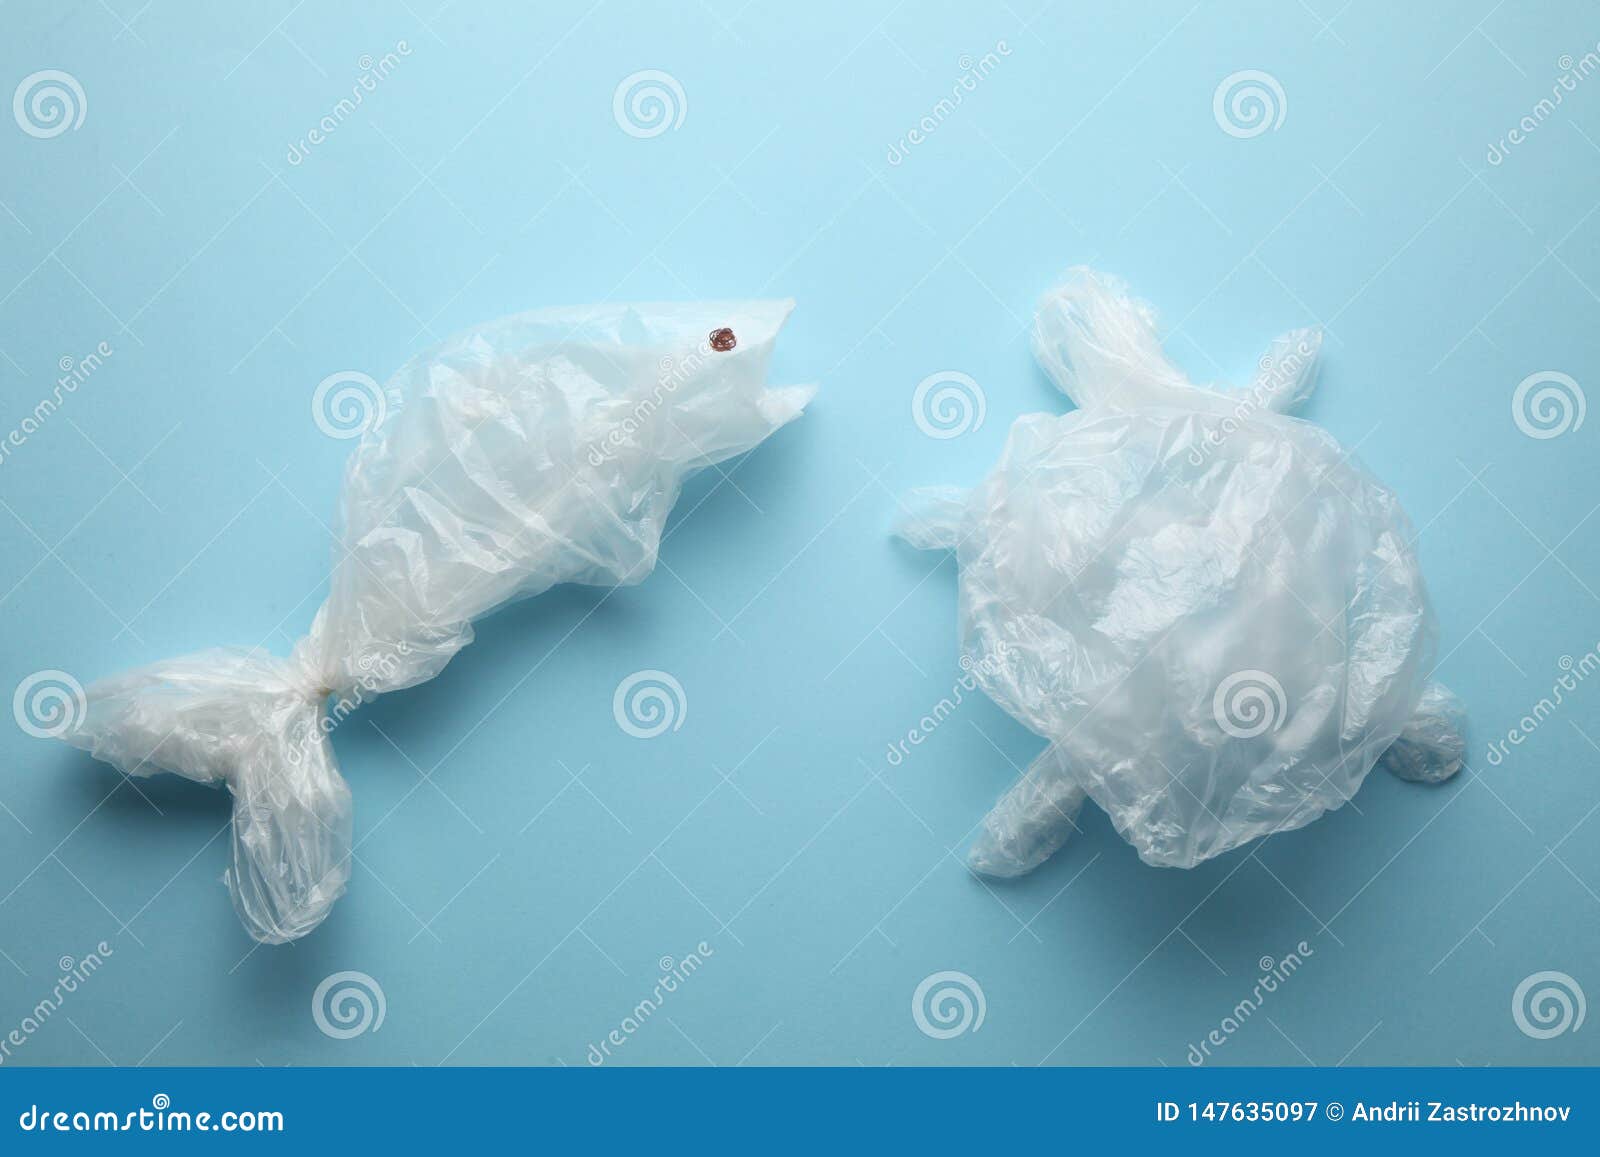 Fish from the Trash Bag, the Concept of Pollution of Nature Stock